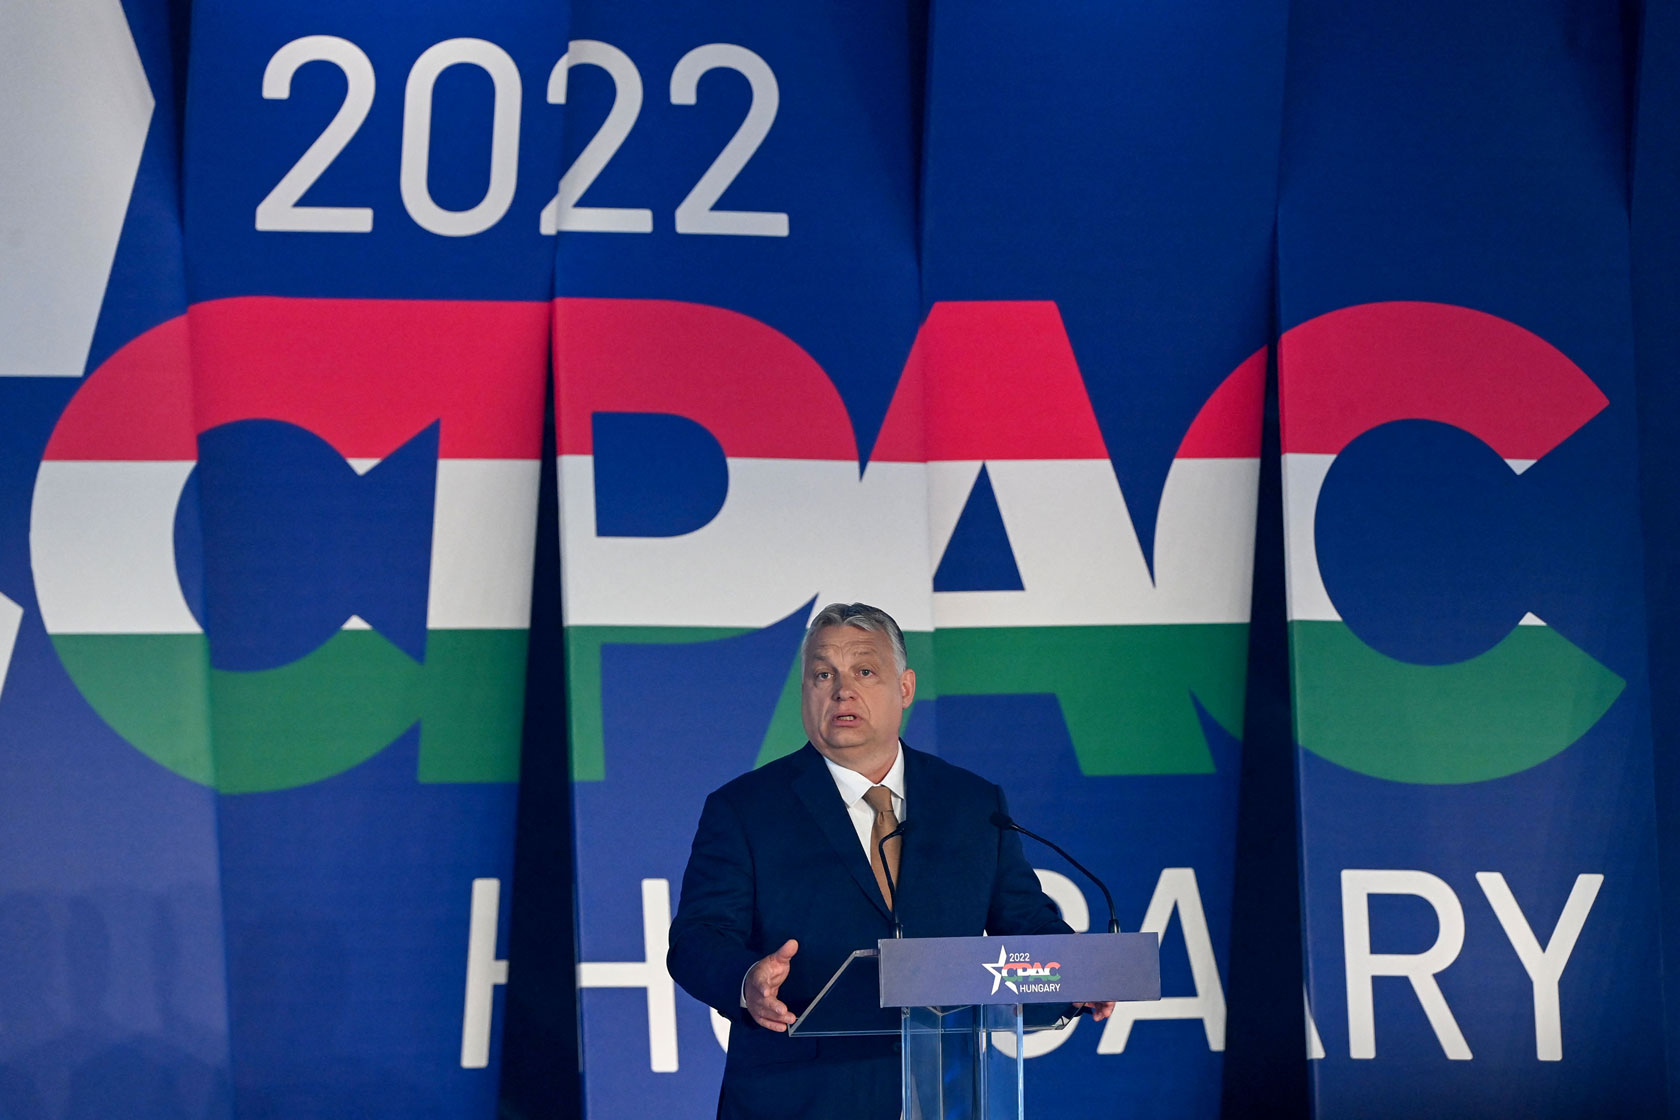 Photo shows Orbán standing at a podium in front of a large banner that says 